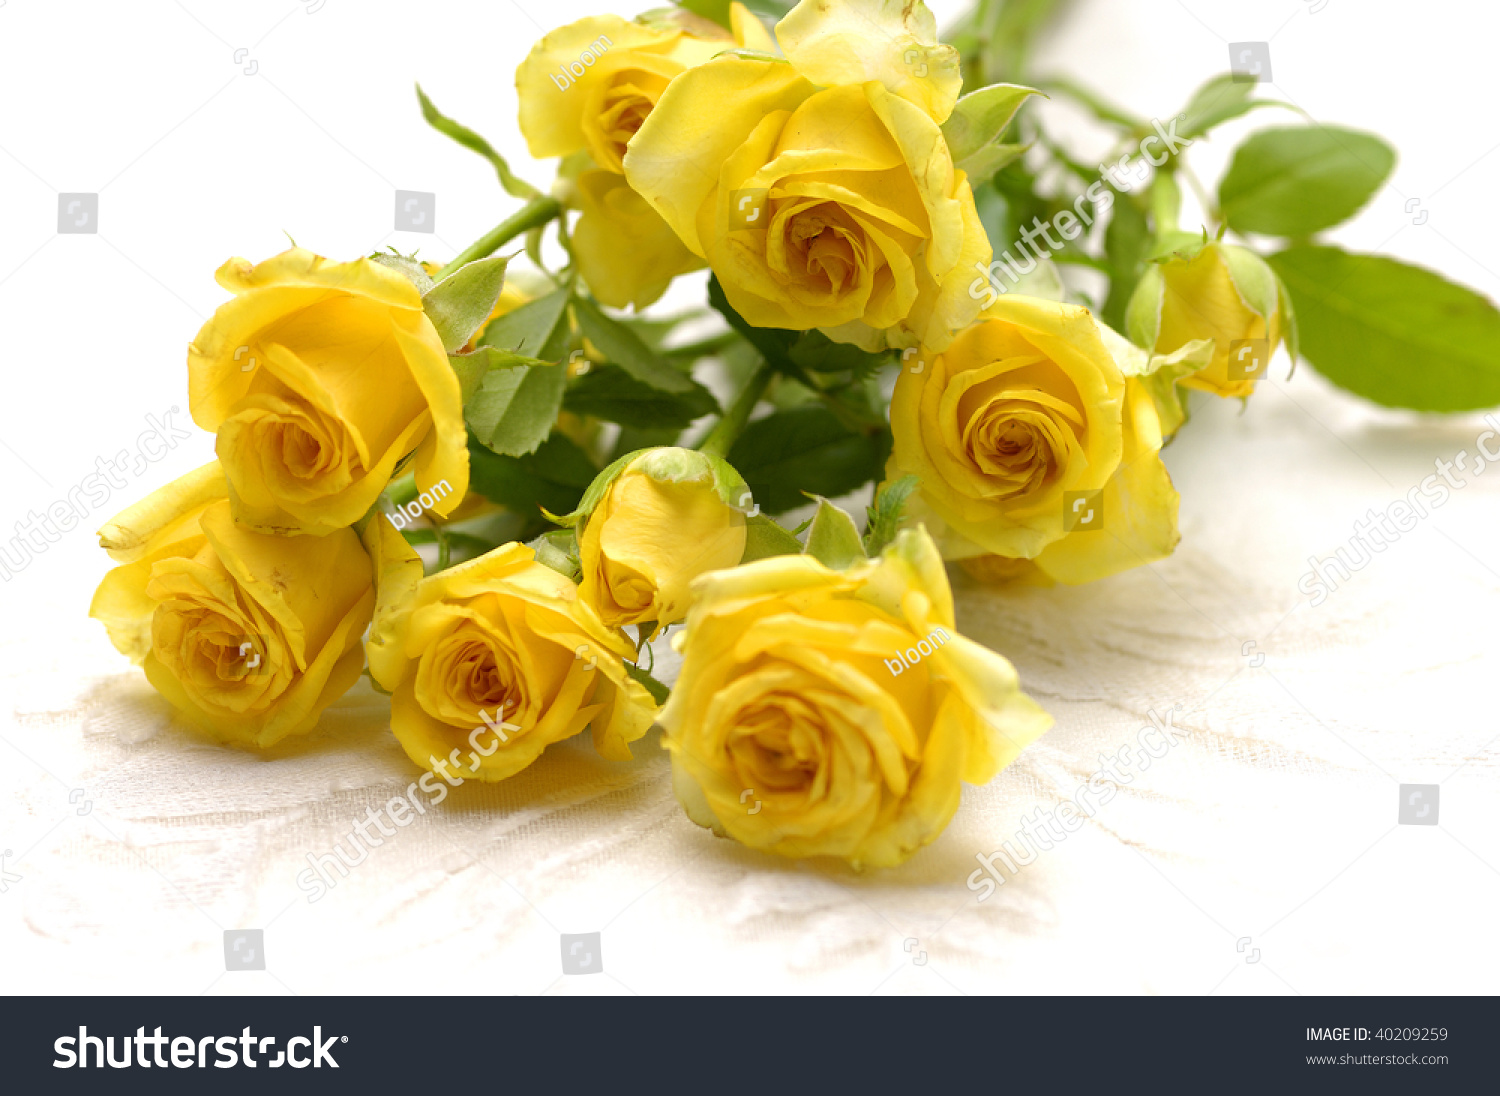 Lay Down Bouquet Of Yellow Roses Stock Photo 40209259 : Shutterstock